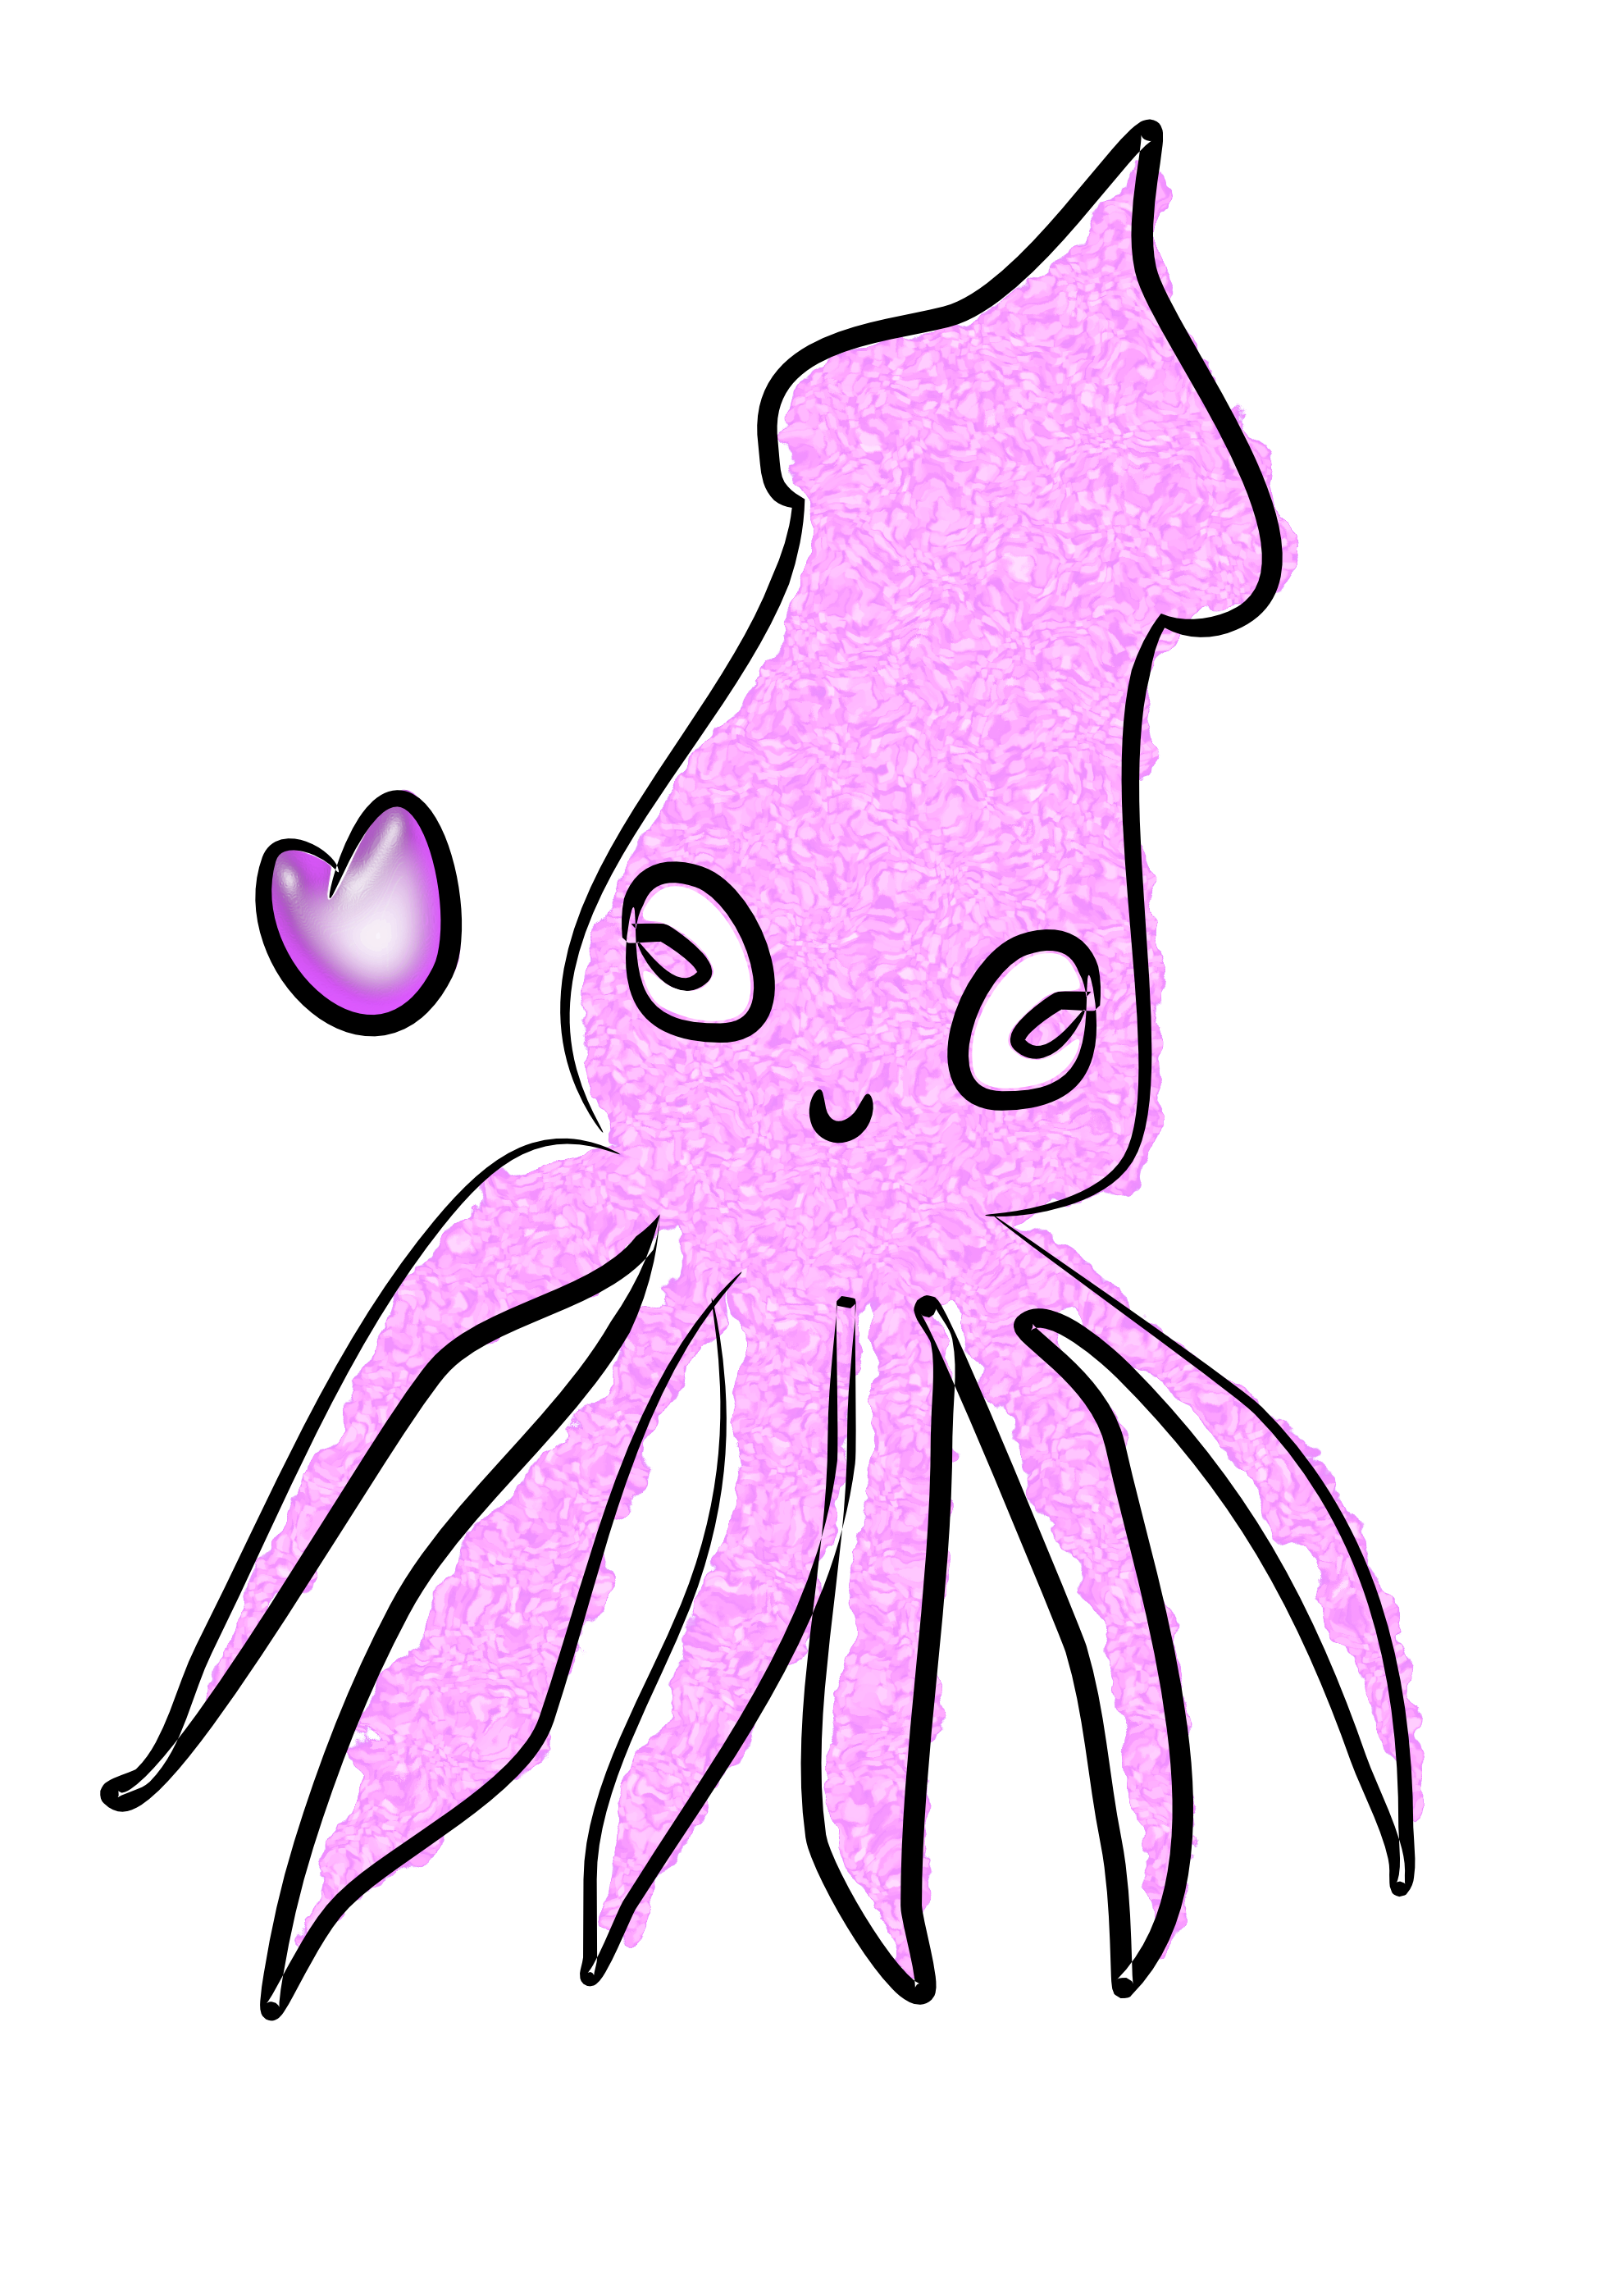 Free Squid Silhouette, Download Free Squid Silhouette png images, Free ...